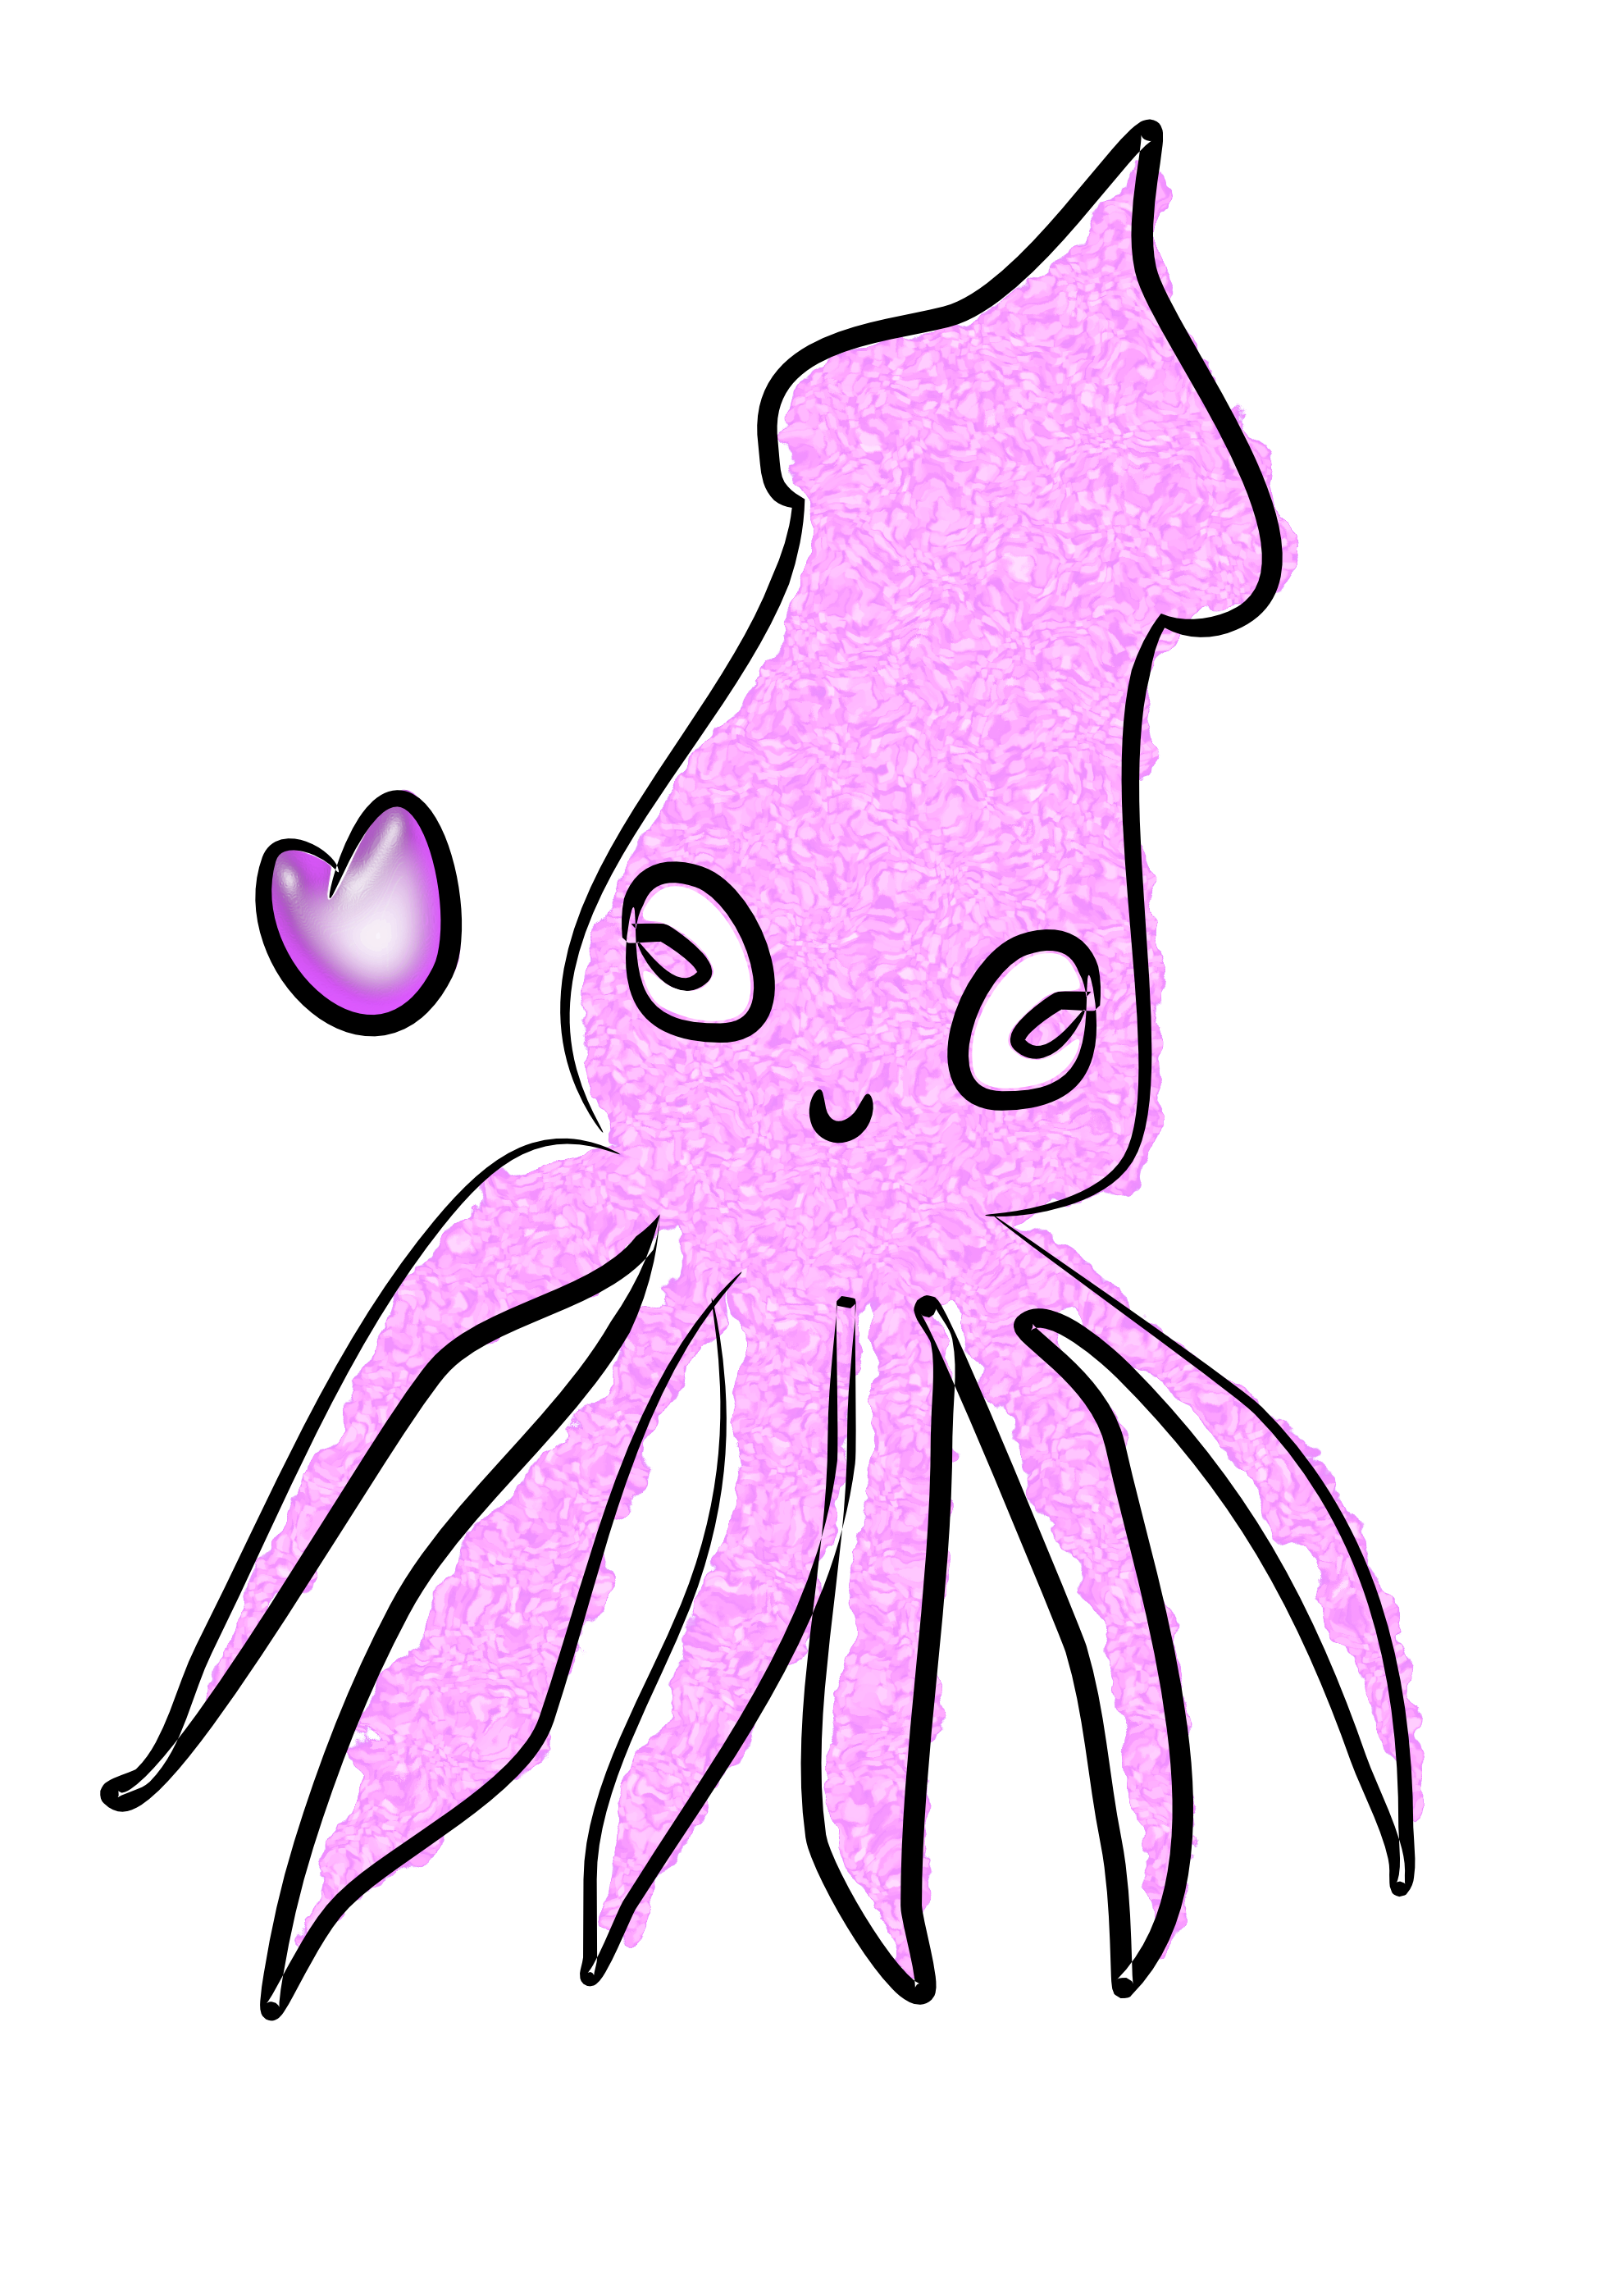 Free Squid Silhouette, Download Free Squid Silhouette png images, Free ...